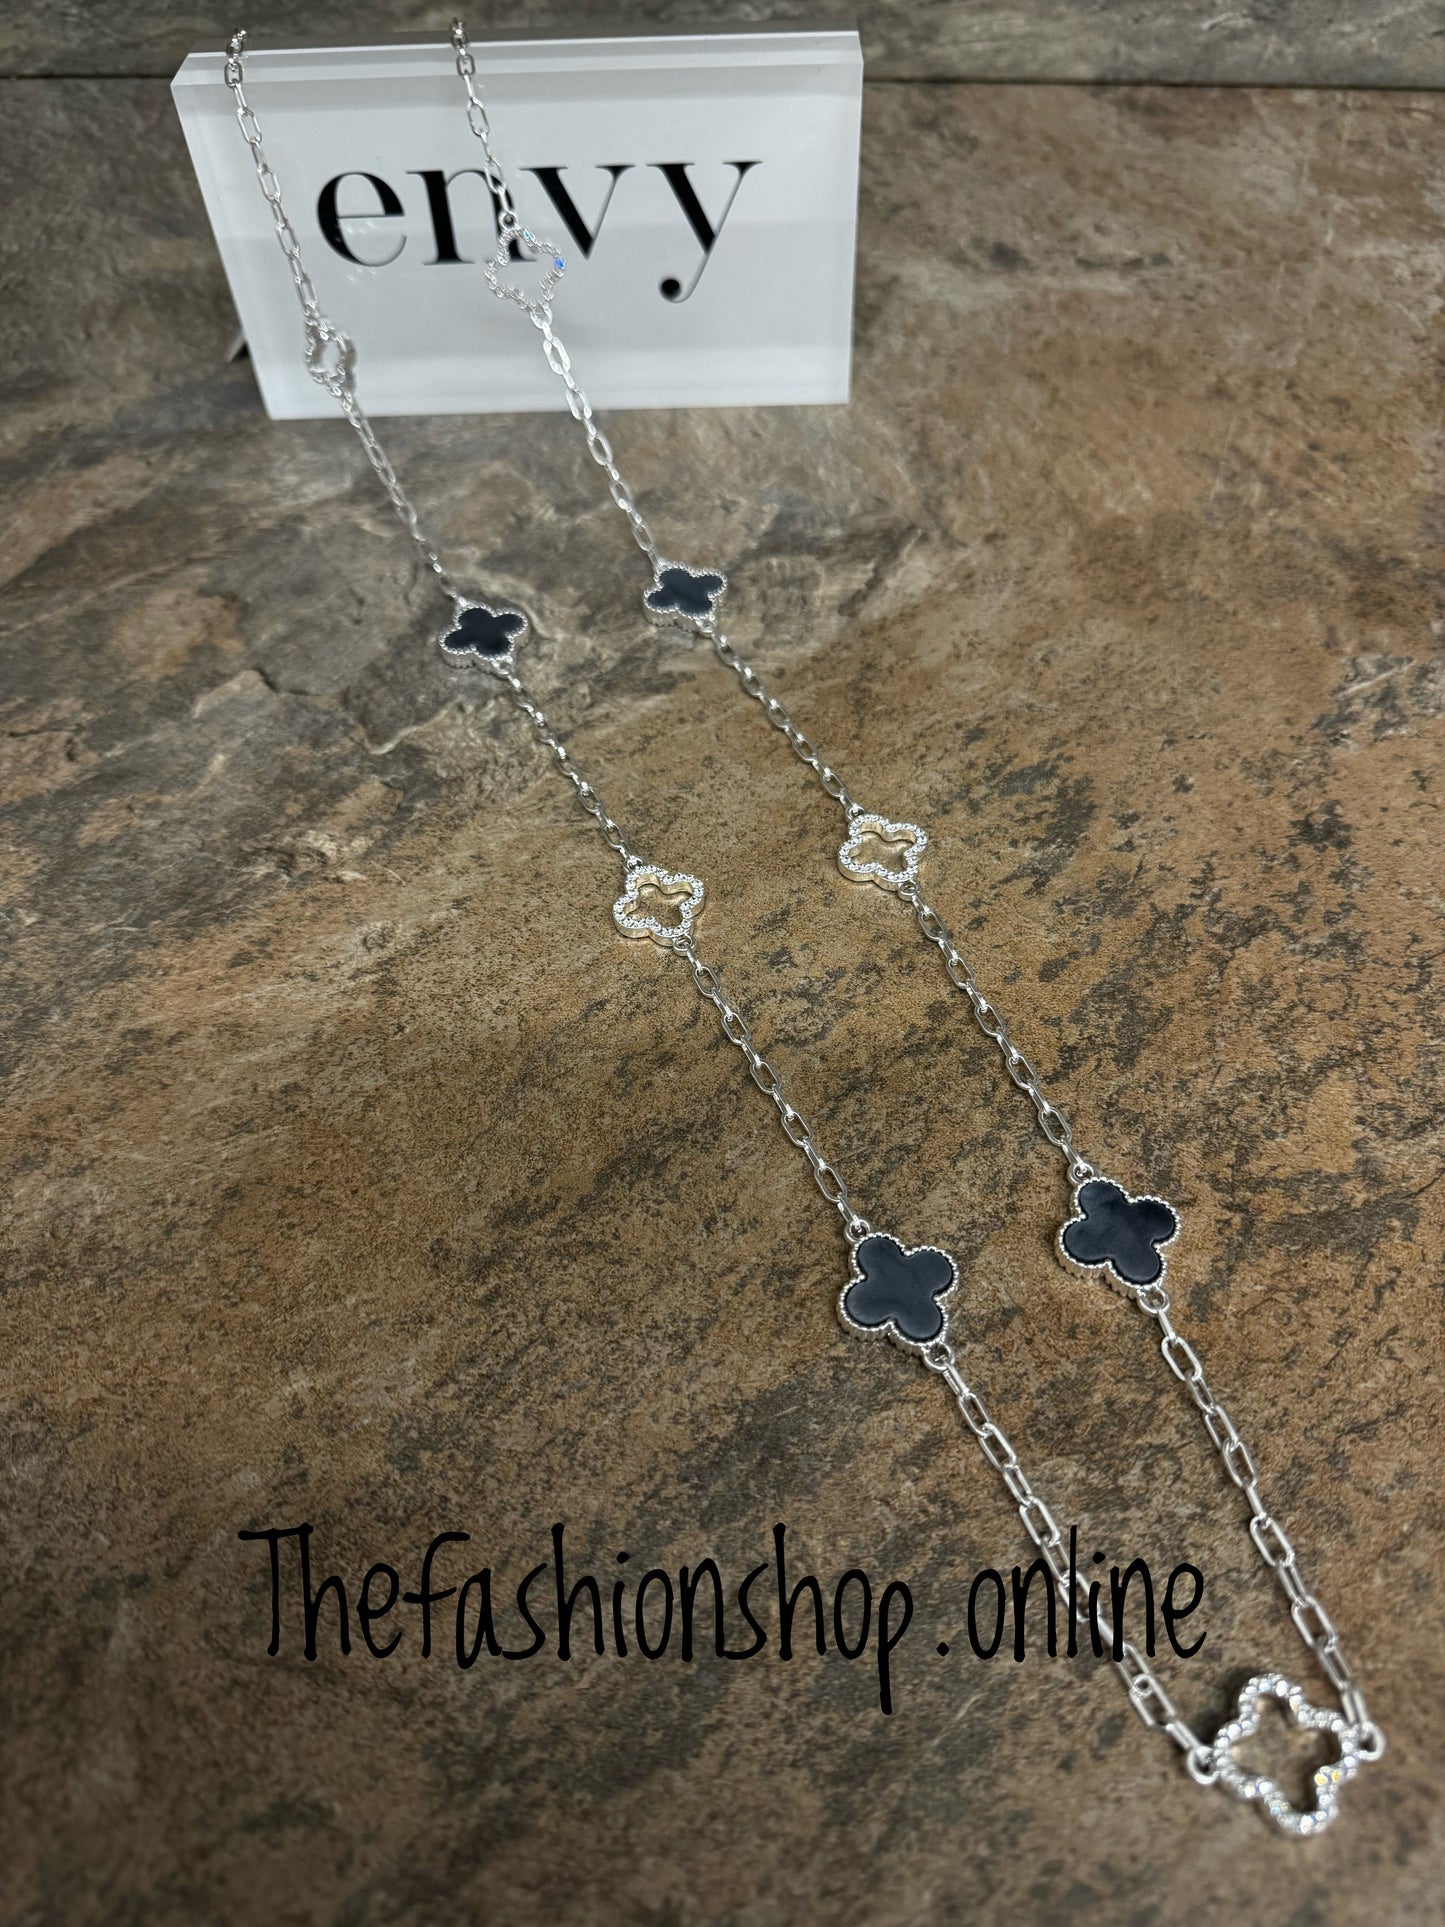 Envy grey and silver sparkle clover necklace